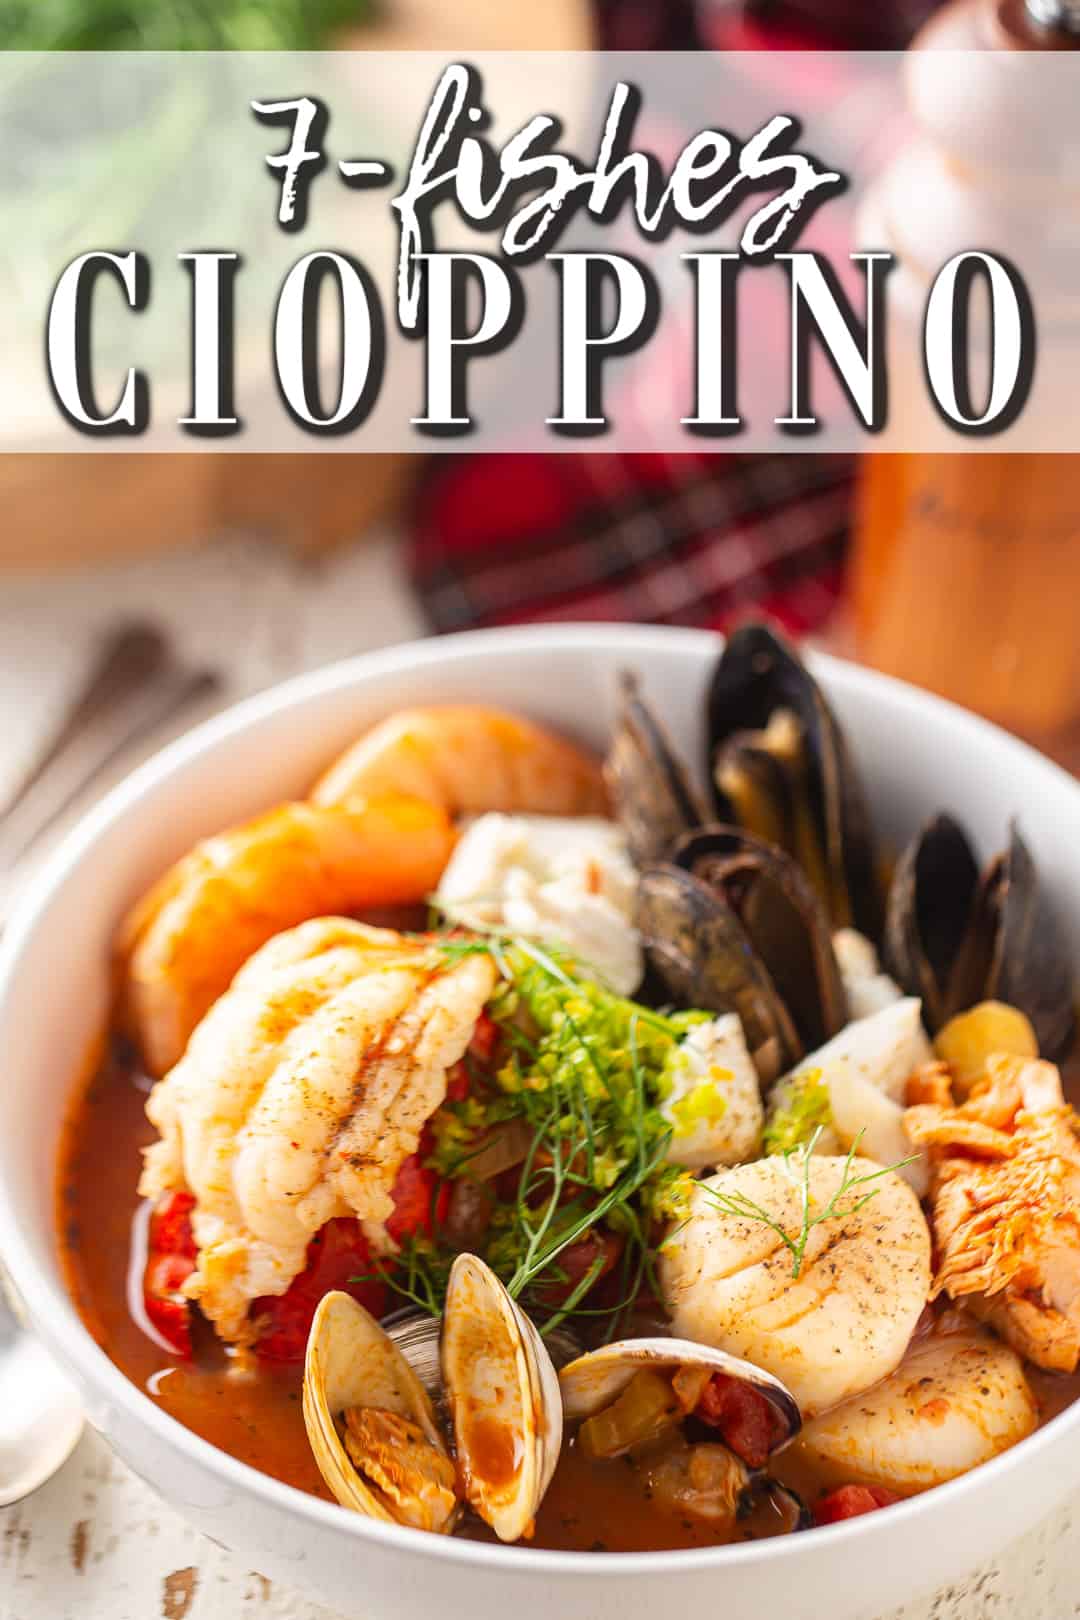 Cioppino recipe, prepared and served in a white bowl with a red plaid napkin.